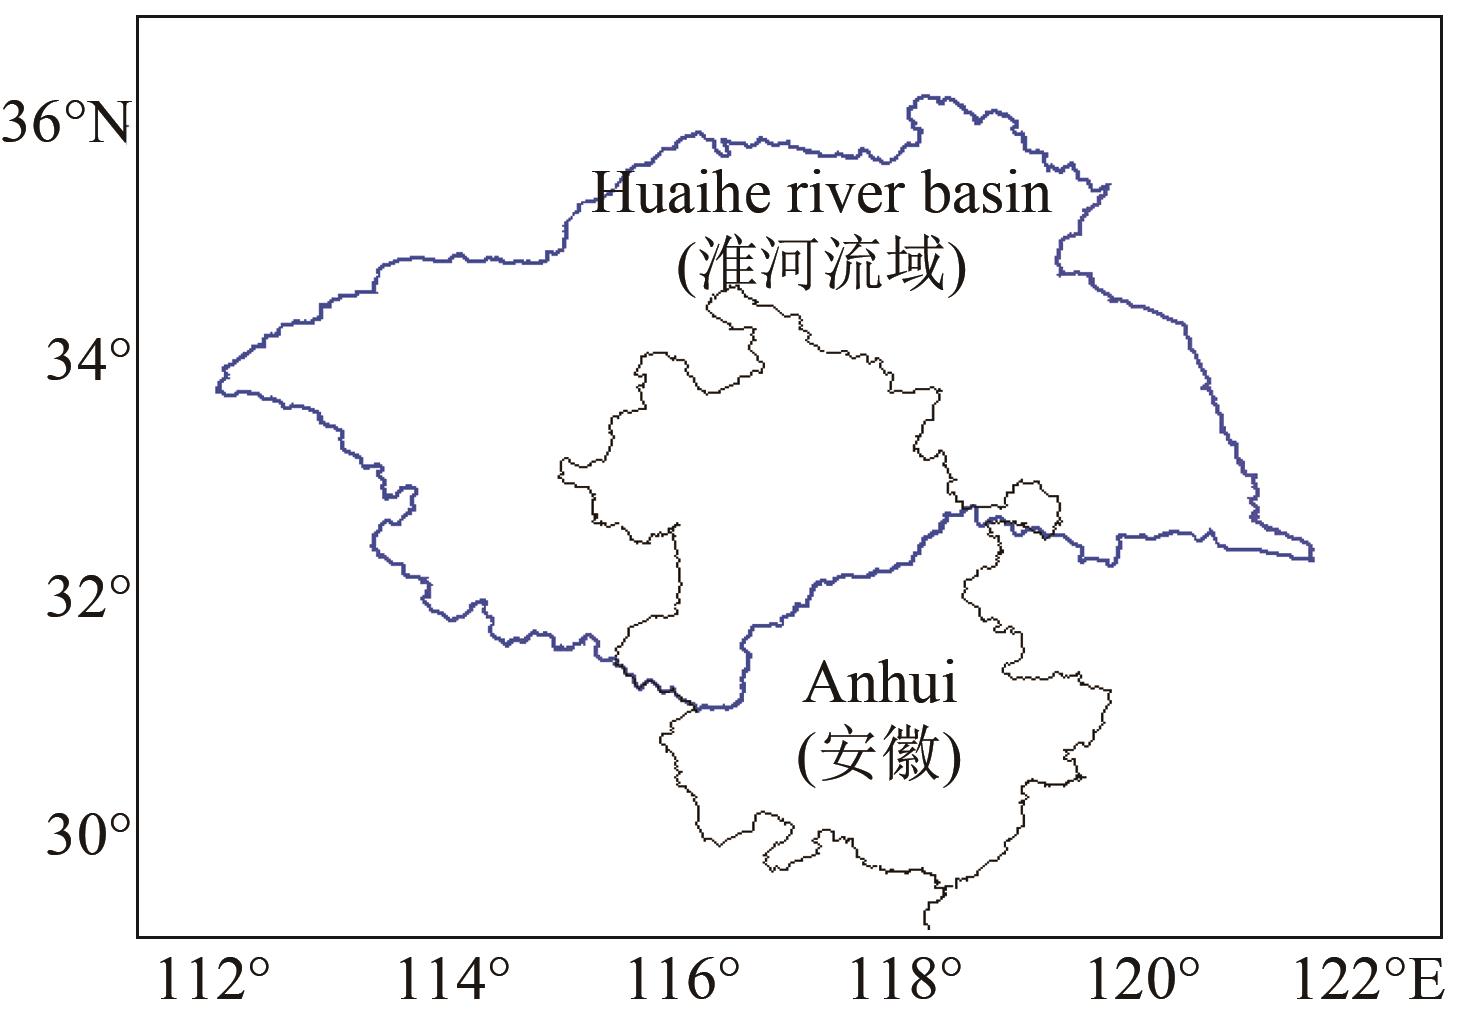 Area Coverage of Anhui zone and Huaihe river basin